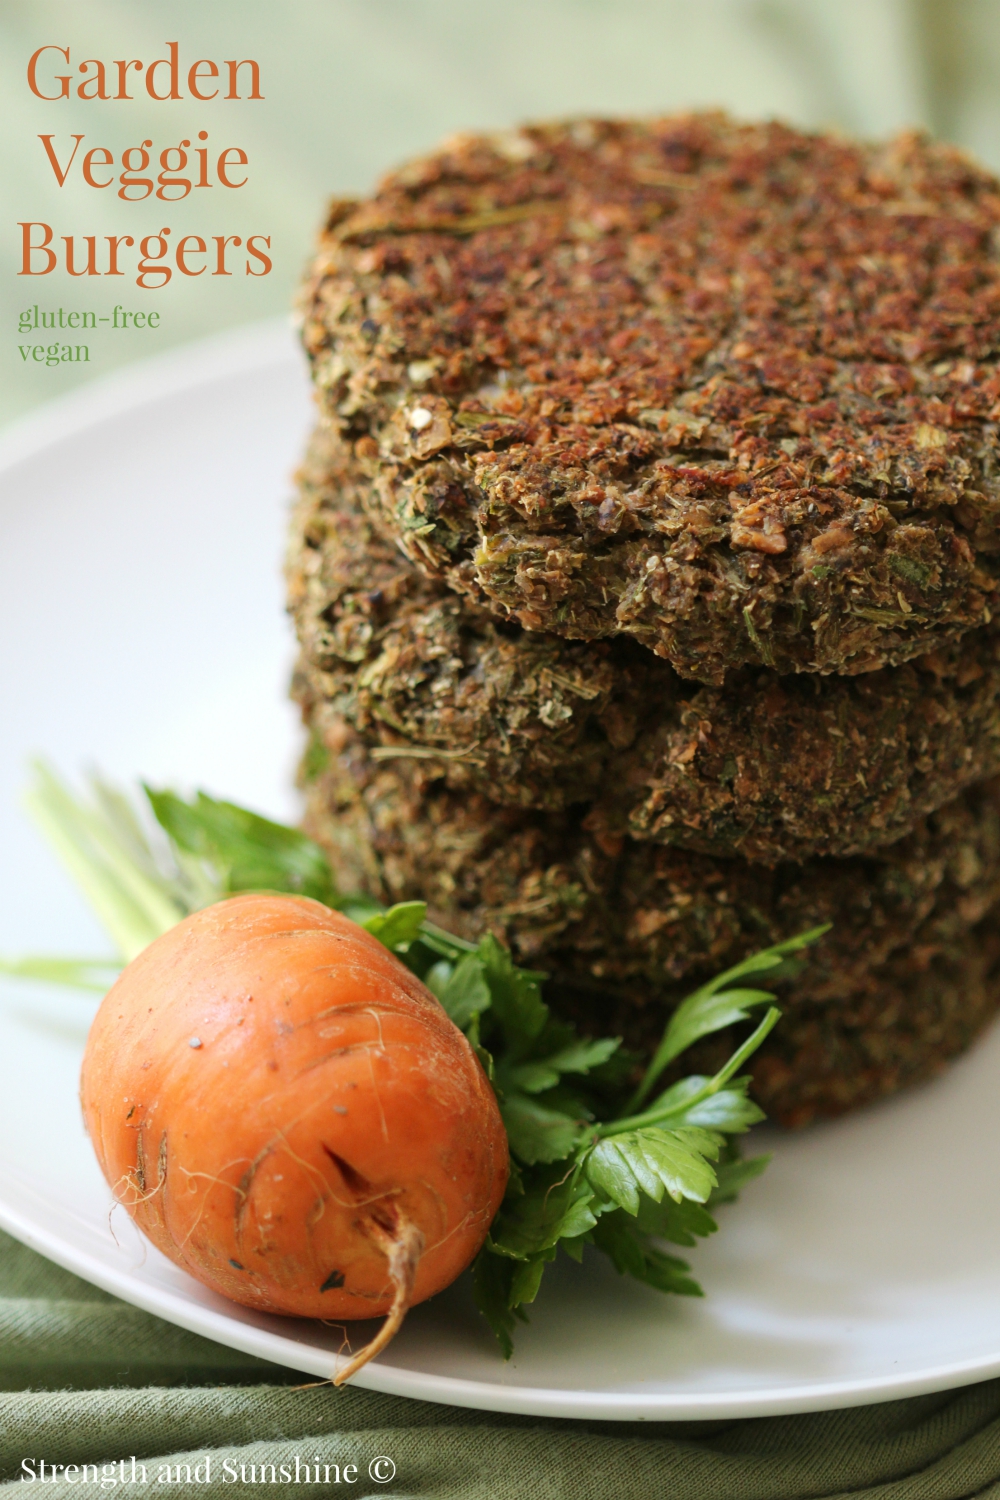 Garden Veggie Burgers | Strength and Sunshine @RebeccaGF666 Taking full advantage of the fresh summer bounty, these healthy, moist, gluten-free, vegan garden veggie burgers will have you wishing summer stayed forever..